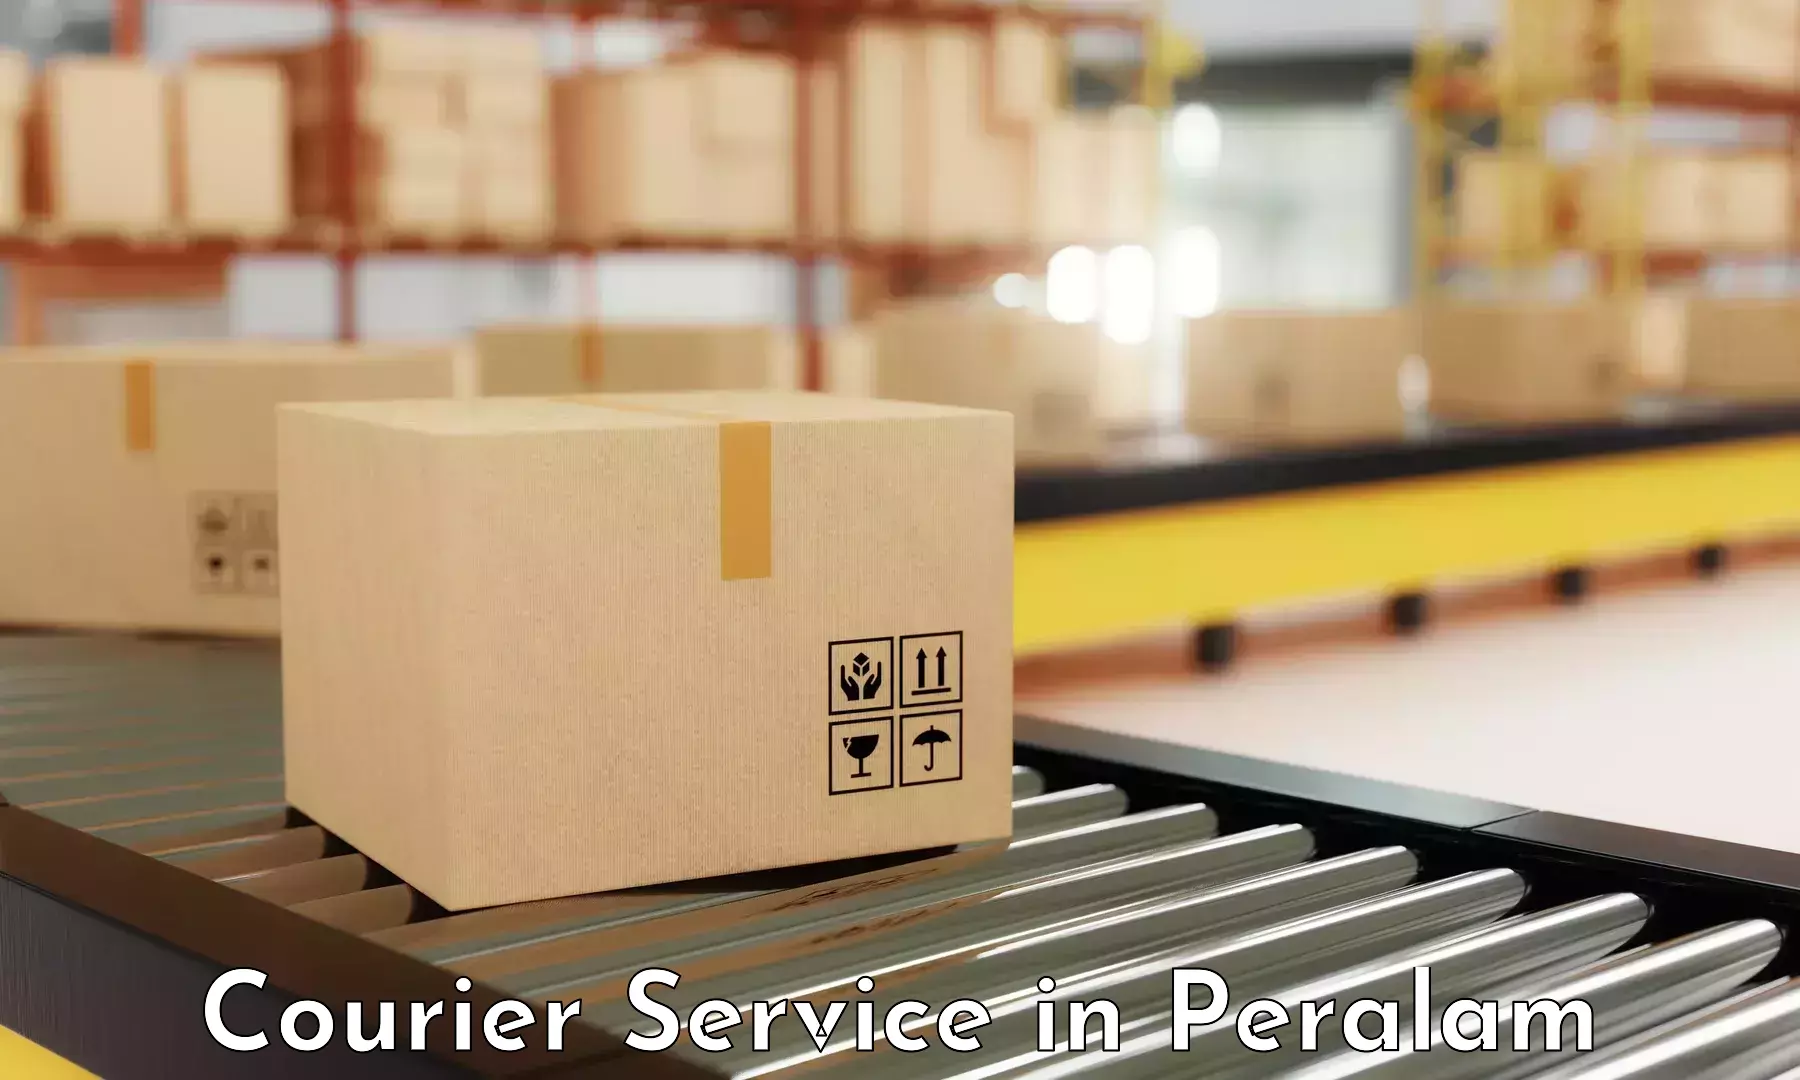 Courier service innovation in Peralam